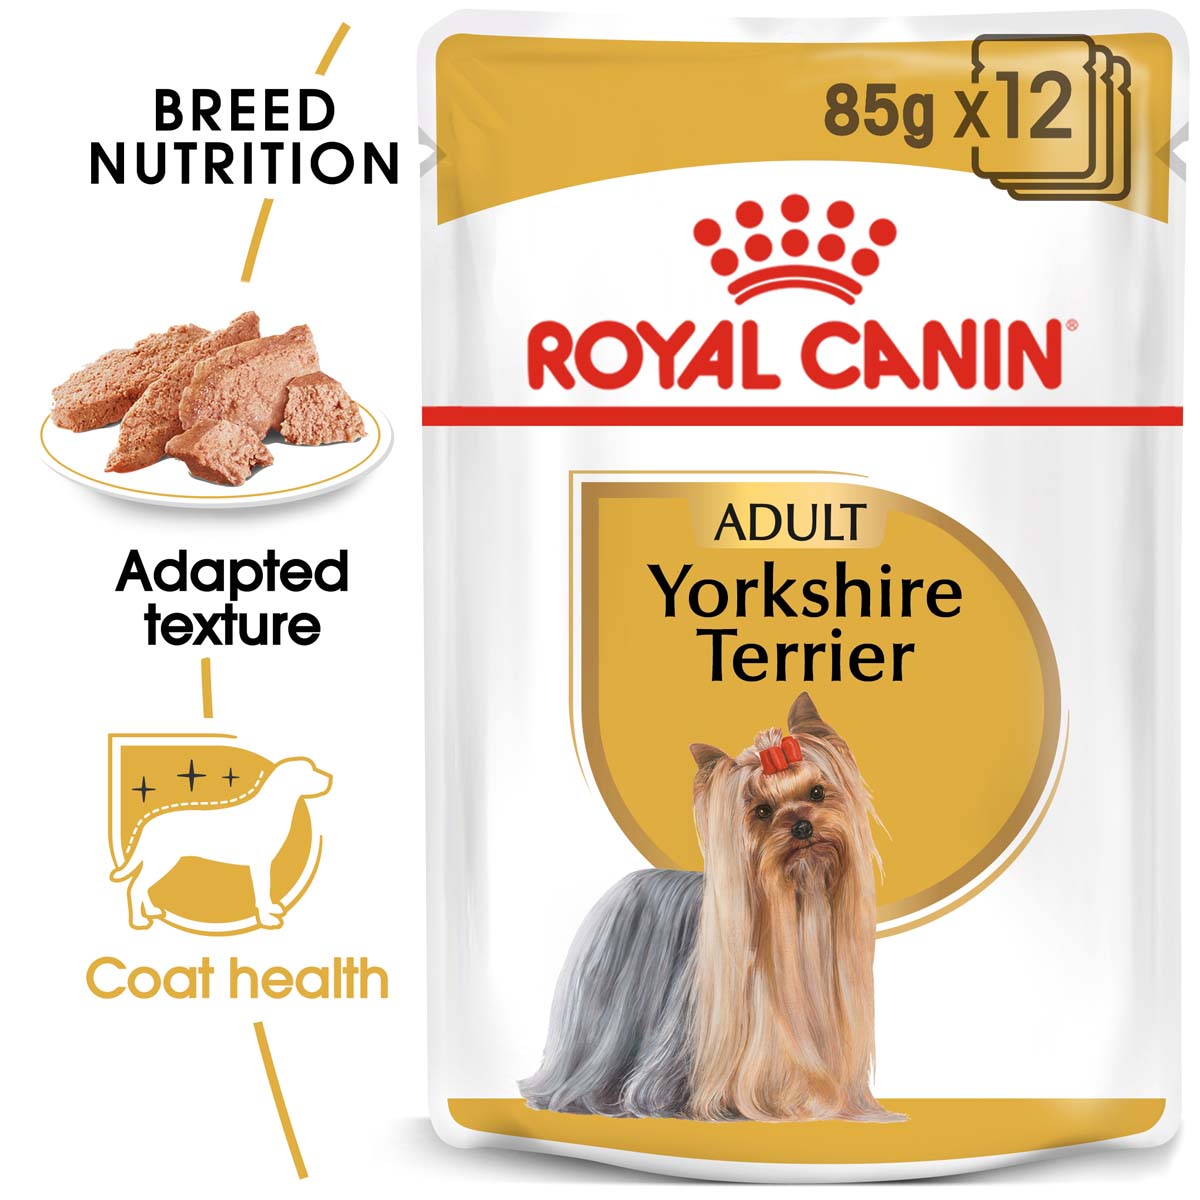 Royal Canin Breed Health Nutrition Yorkshire Terrier, 12 x 85 g